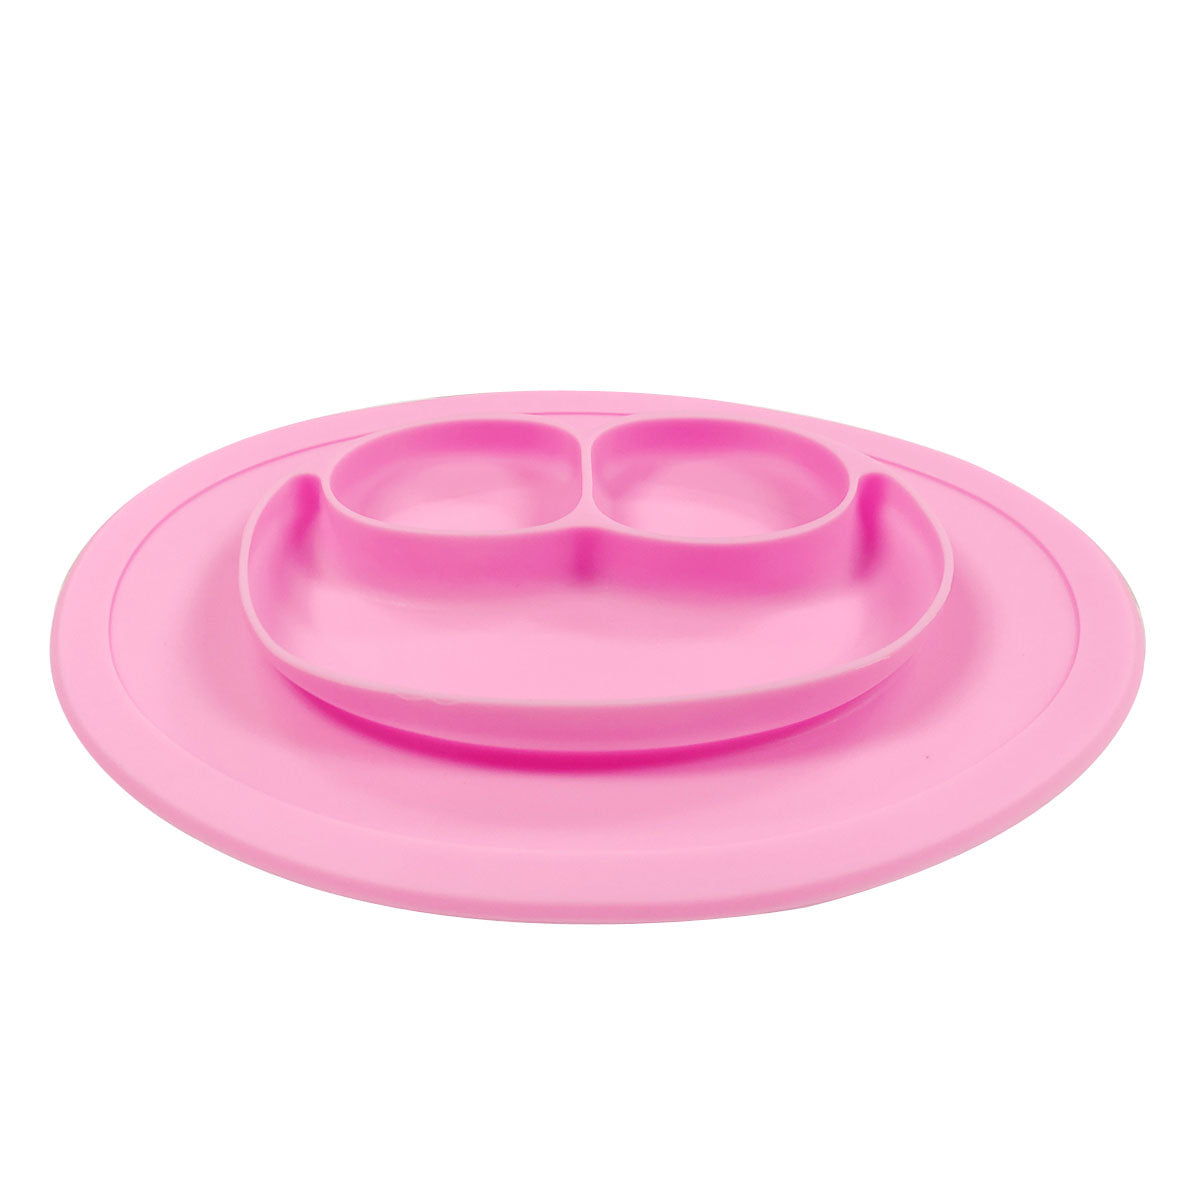 1pc Suction Plates Babies Baby Plate Set Infant Divided Plate